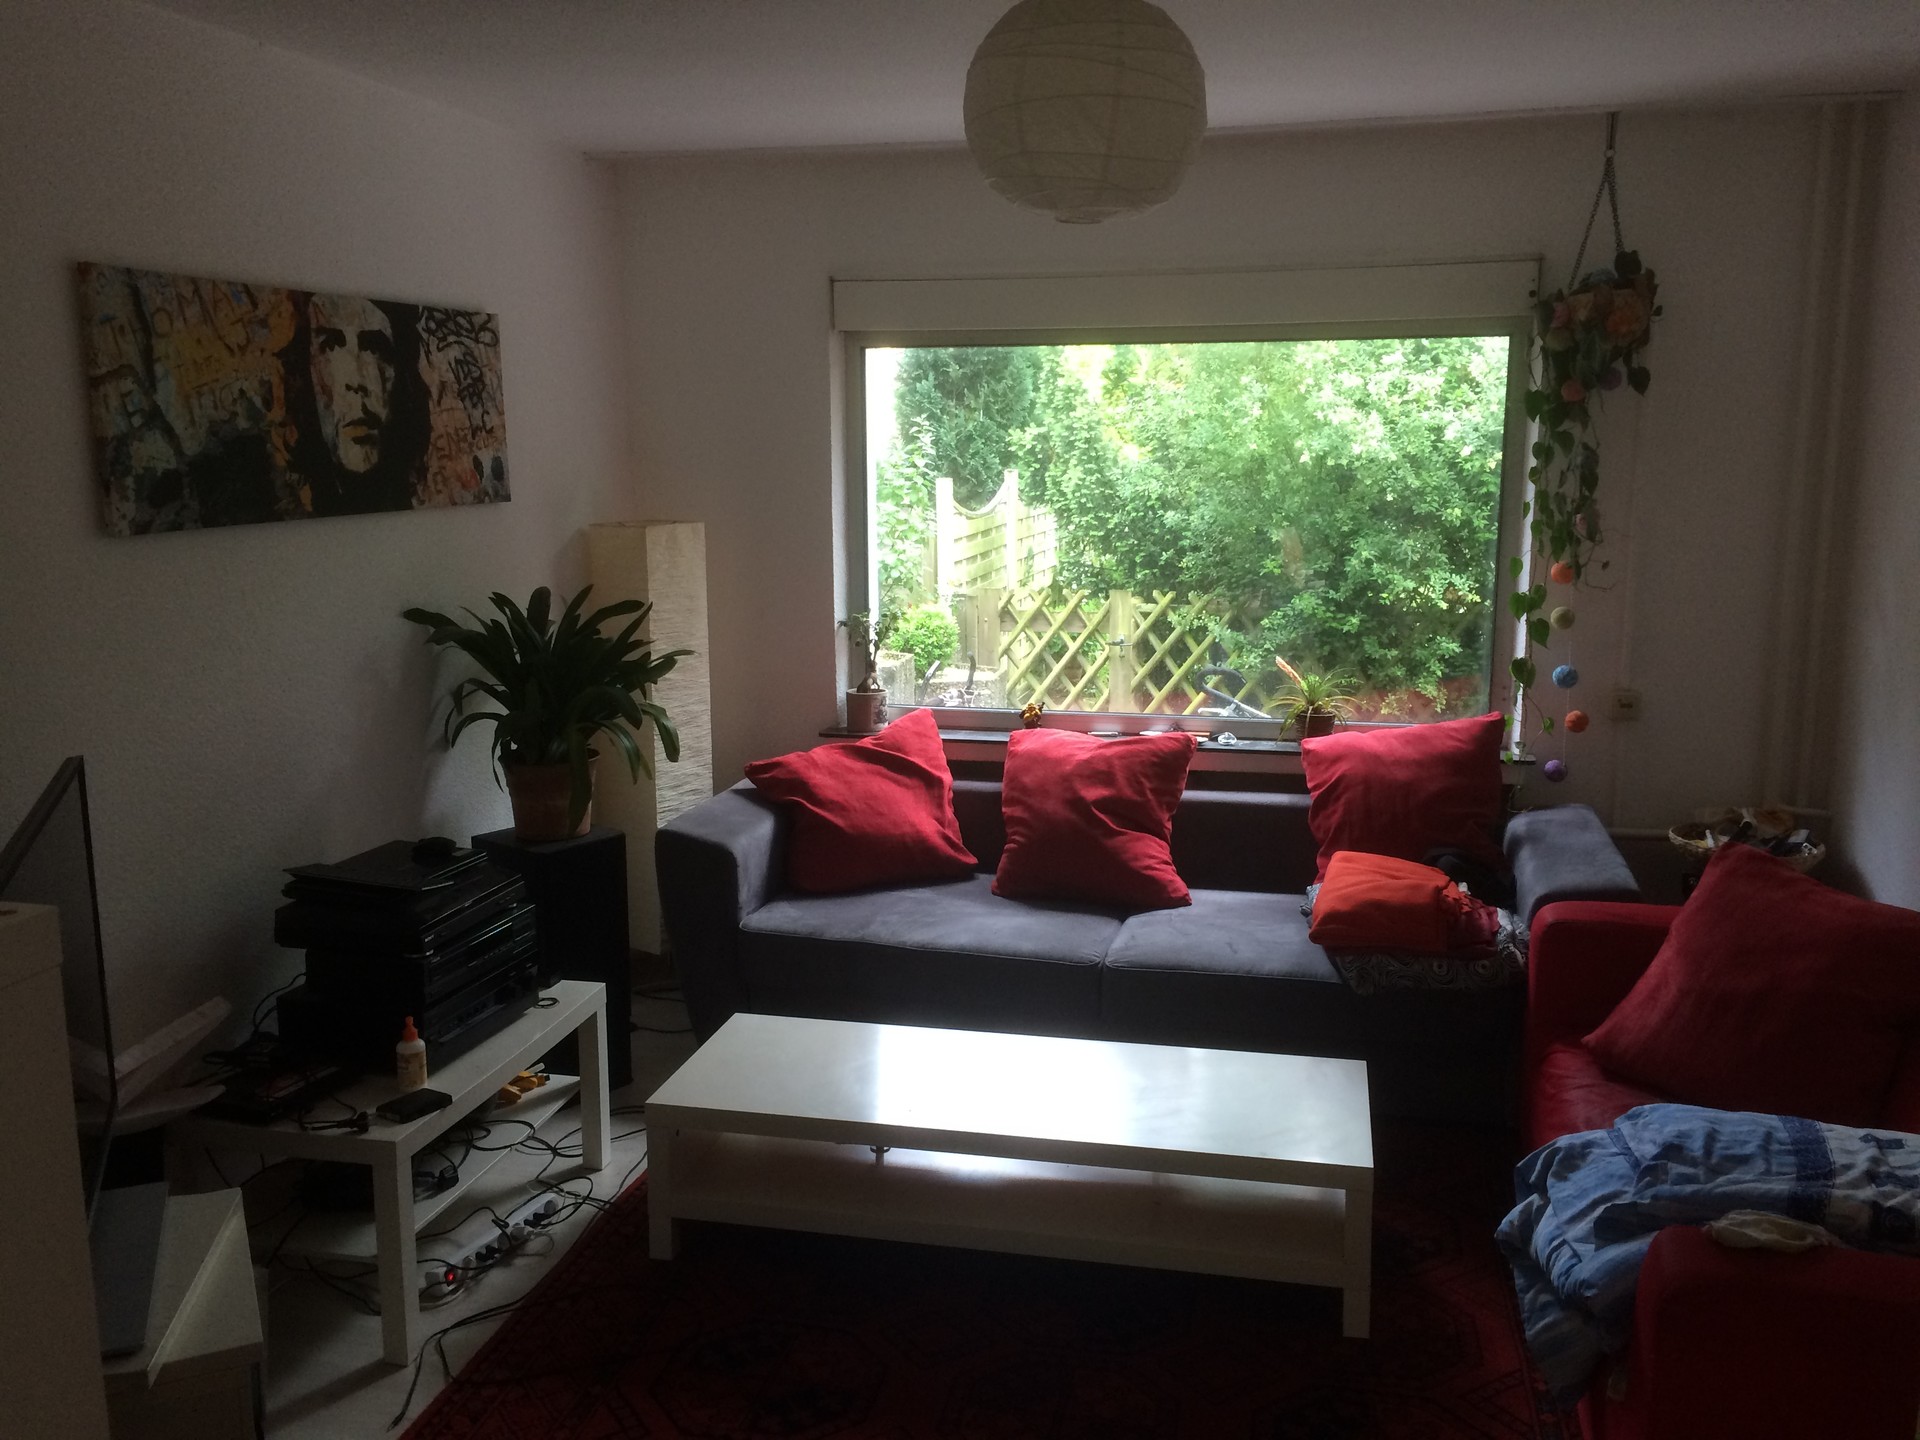 16 qm room in a nice house with garden (August2016 ... - 1920 x 1440 jpeg 422kB